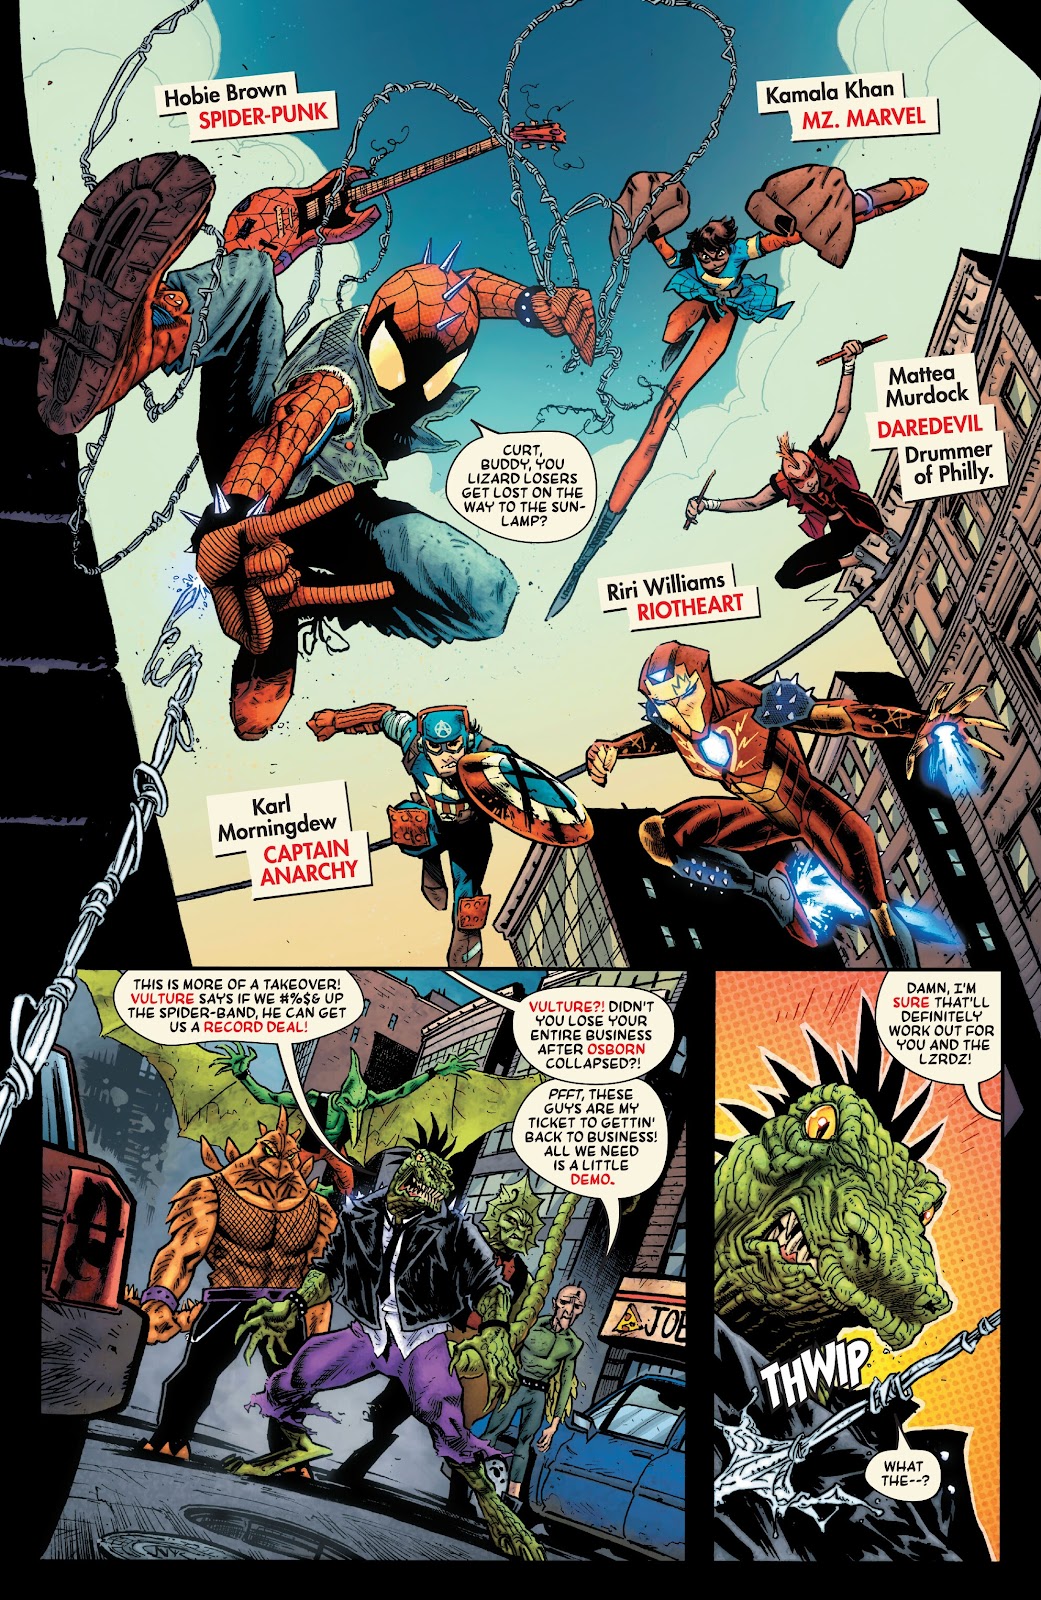 Spider-Punk: Arms Race issue 1 - Page 4